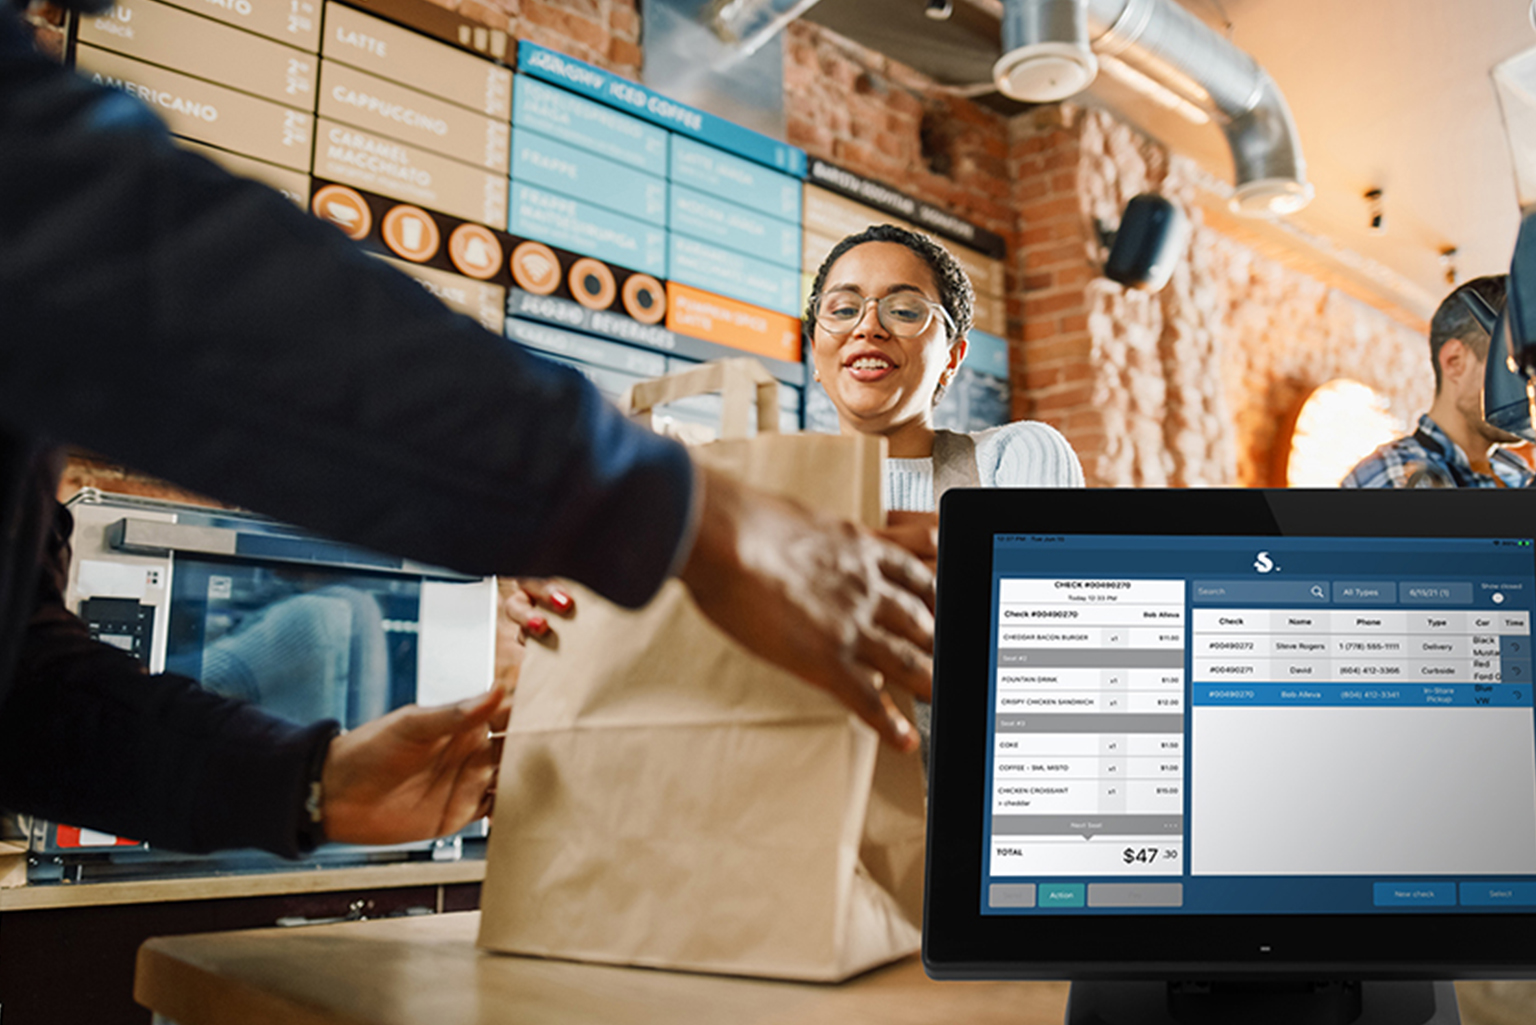 cloud Base pos systems for restaurants